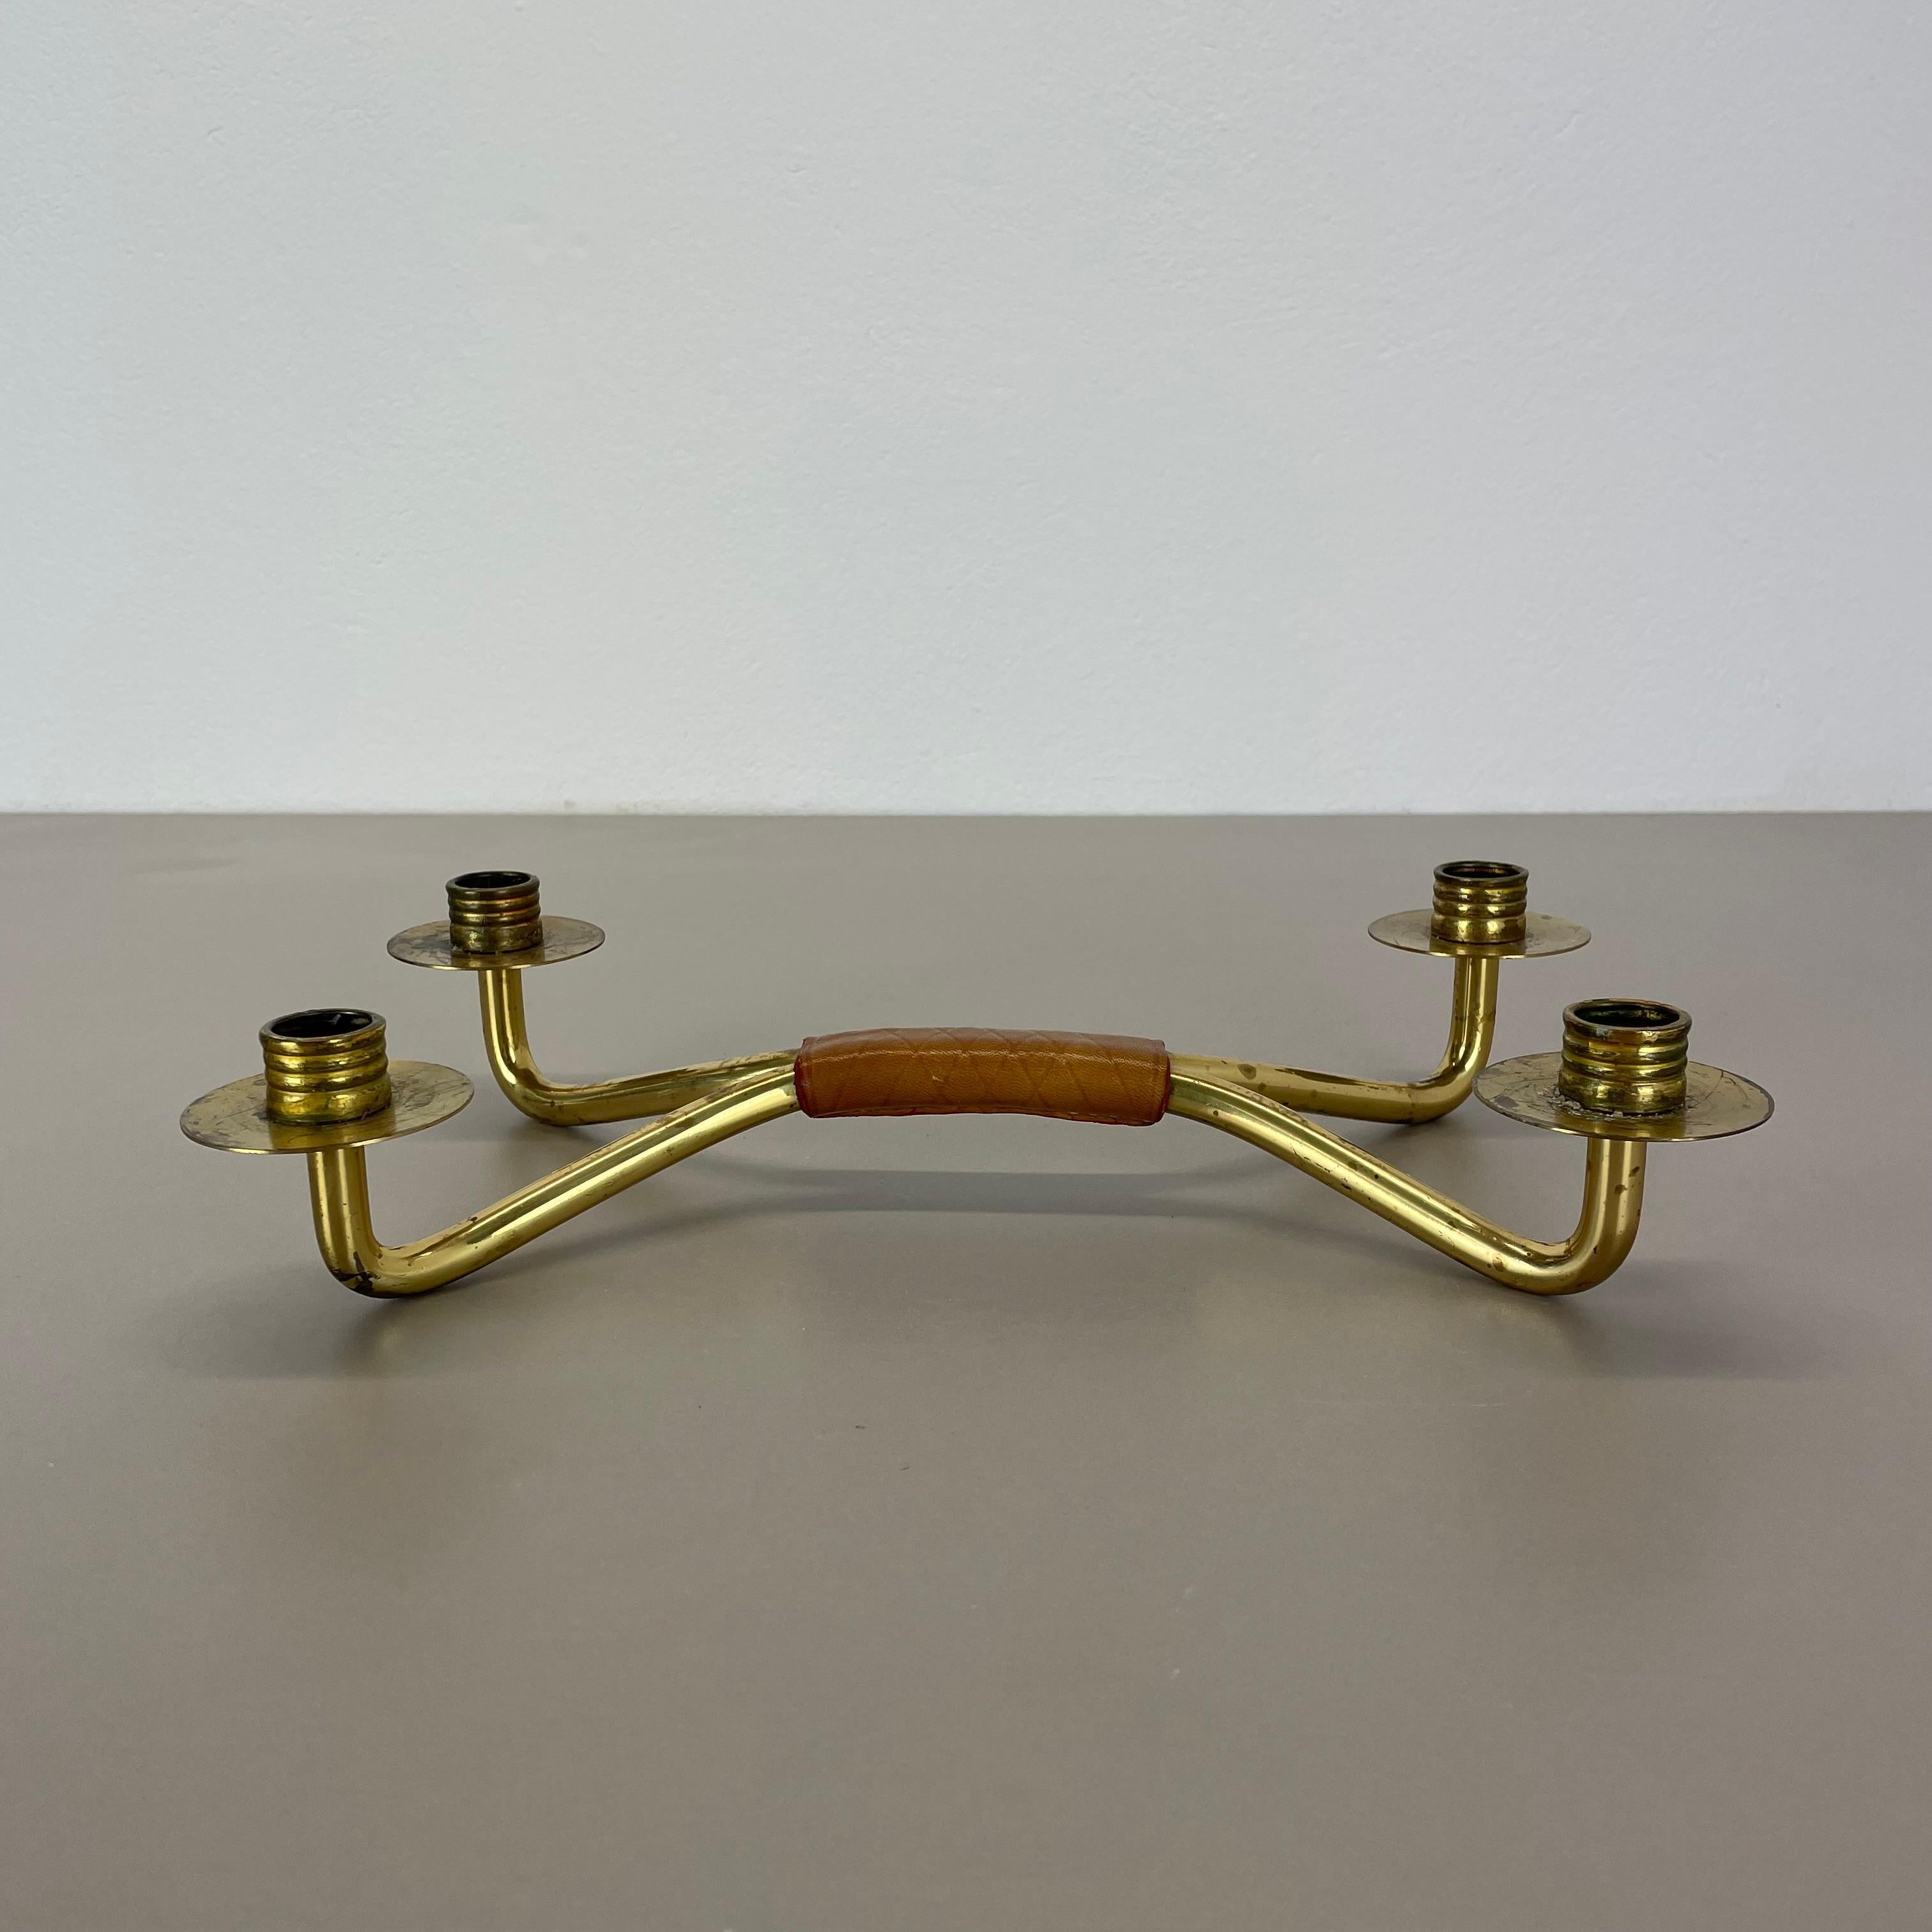 20th Century Modernist Auböck Style Brutalist brass and leather Candleholder, Austria 1950s For Sale